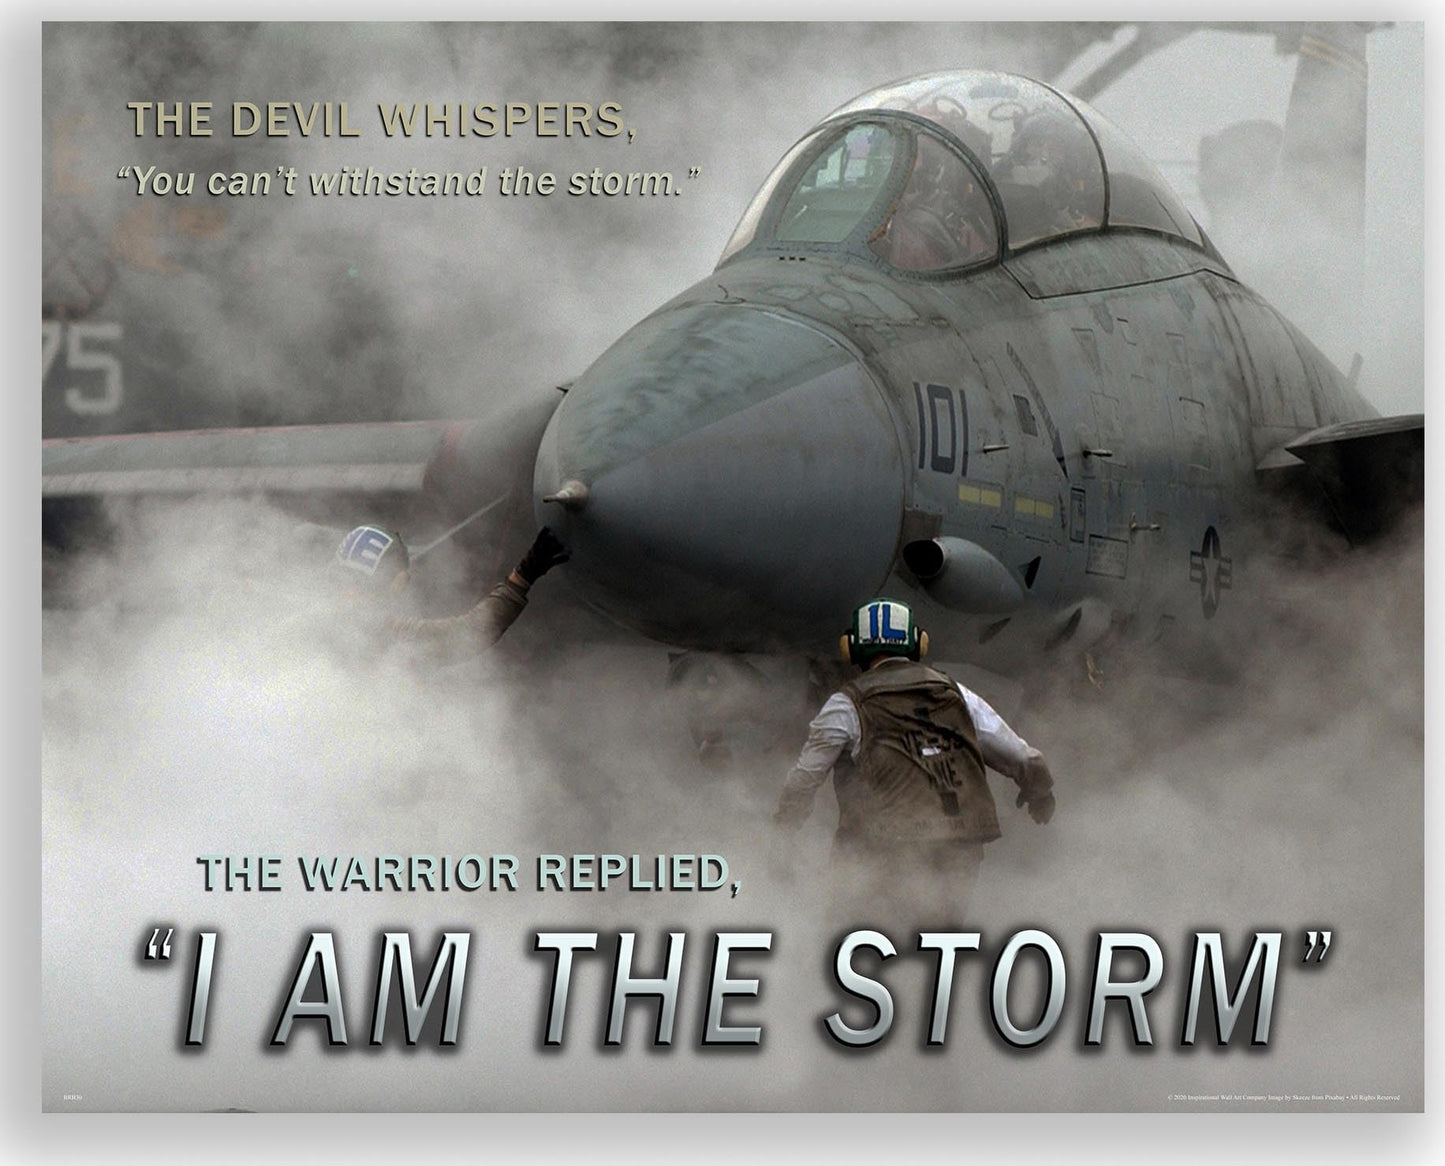 Inspirational Wall Art Co. - I Am The Storm - Air Force Jet Aircraft Branch Veteran Sunset Sky Infantry Motivational Players Quotes Posters - Print Home Gift Bedroom Decor - 11X14 inches